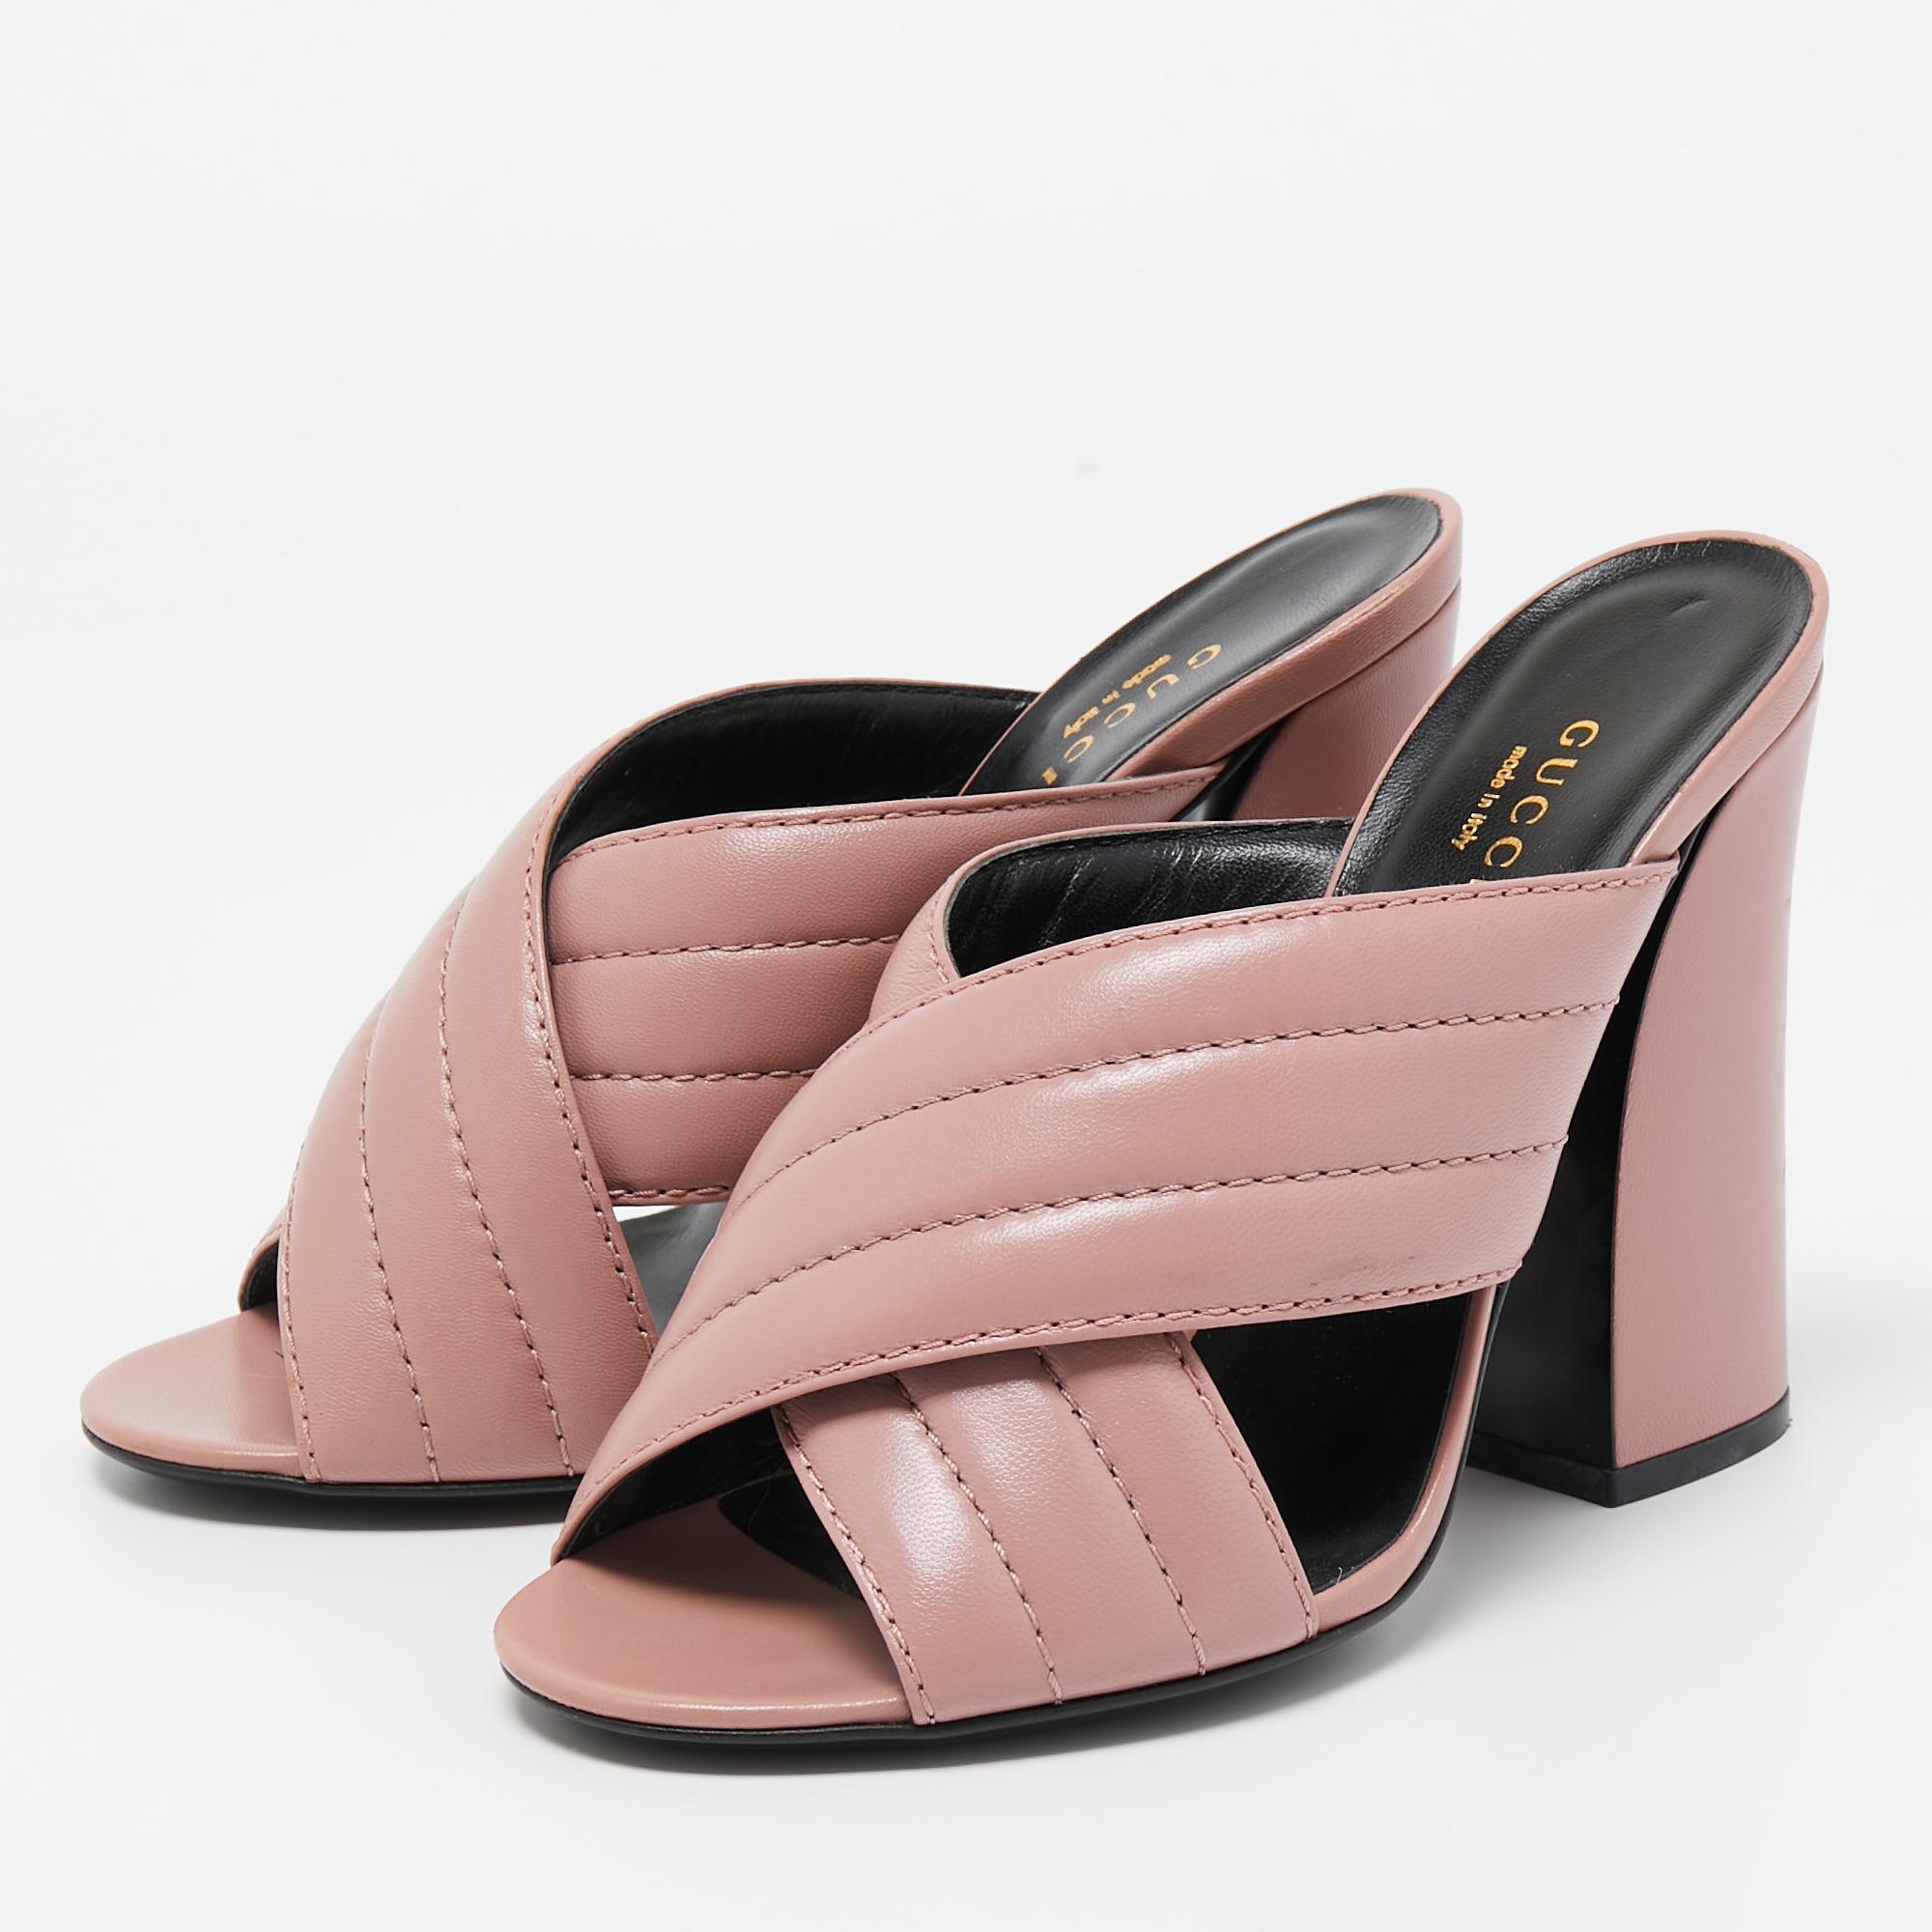 Gucci Pink Quilted Leather Webby Slide Sandals Size 38.5 In Good Condition For Sale In Dubai, Al Qouz 2